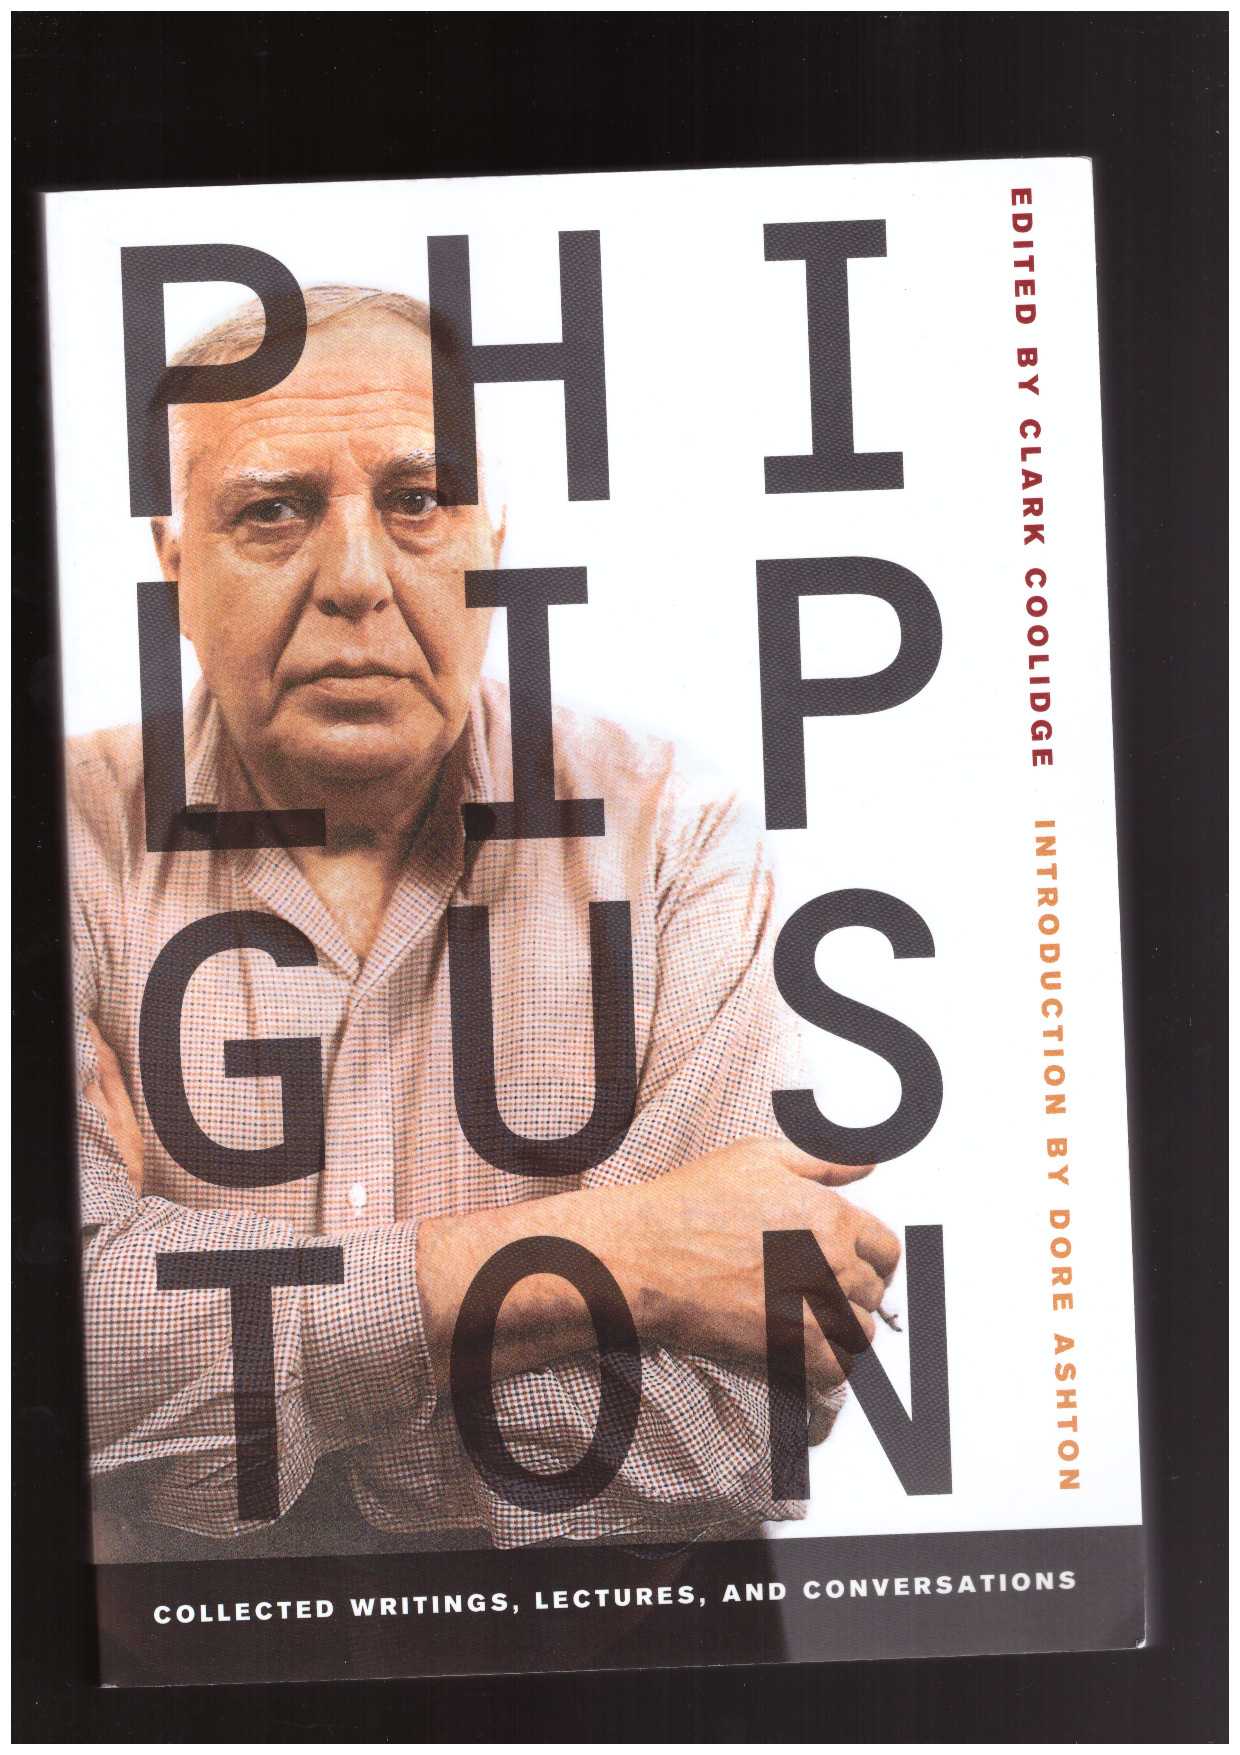 GUSTON, Philip; COOLIDGE, Clark (ed.) - Philip Guston. Collected Writings, Lectures, and Conversations